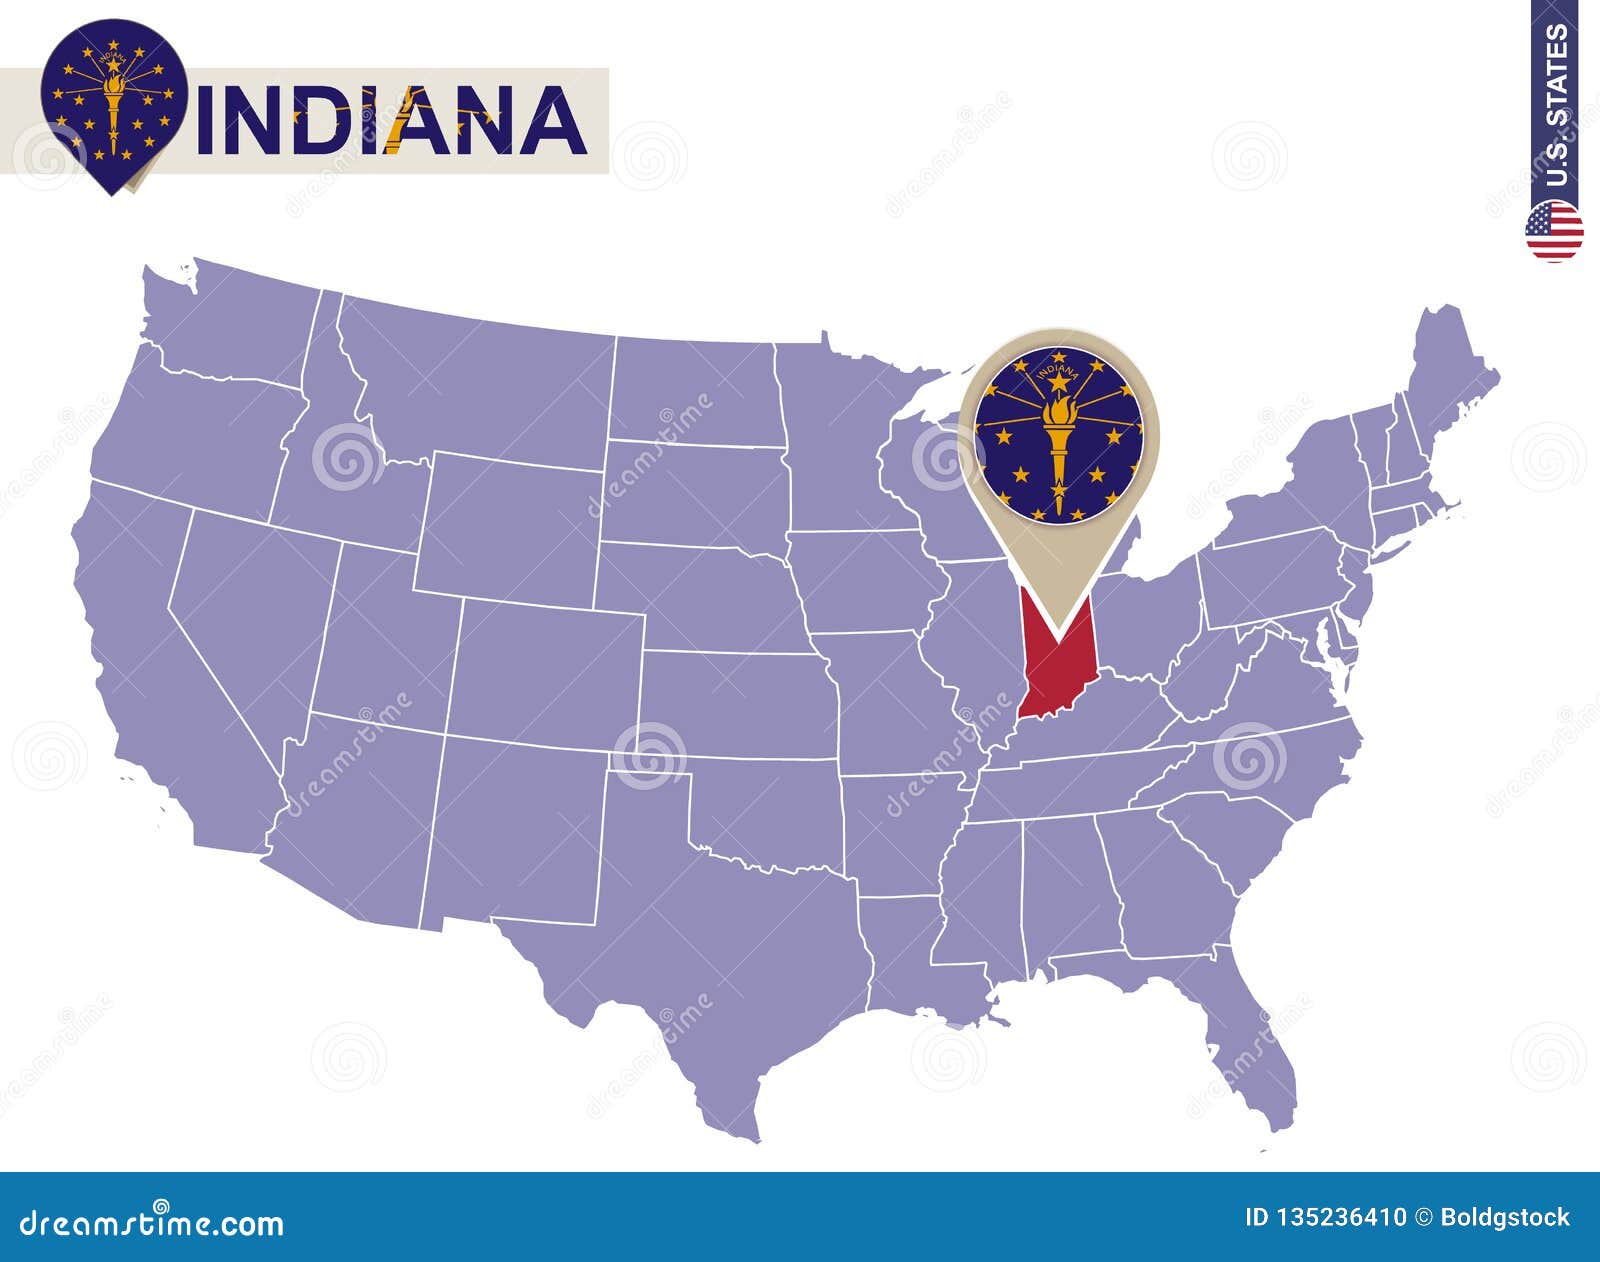 Indiana State On Usa Map Indiana Flag And Map Stock Vector